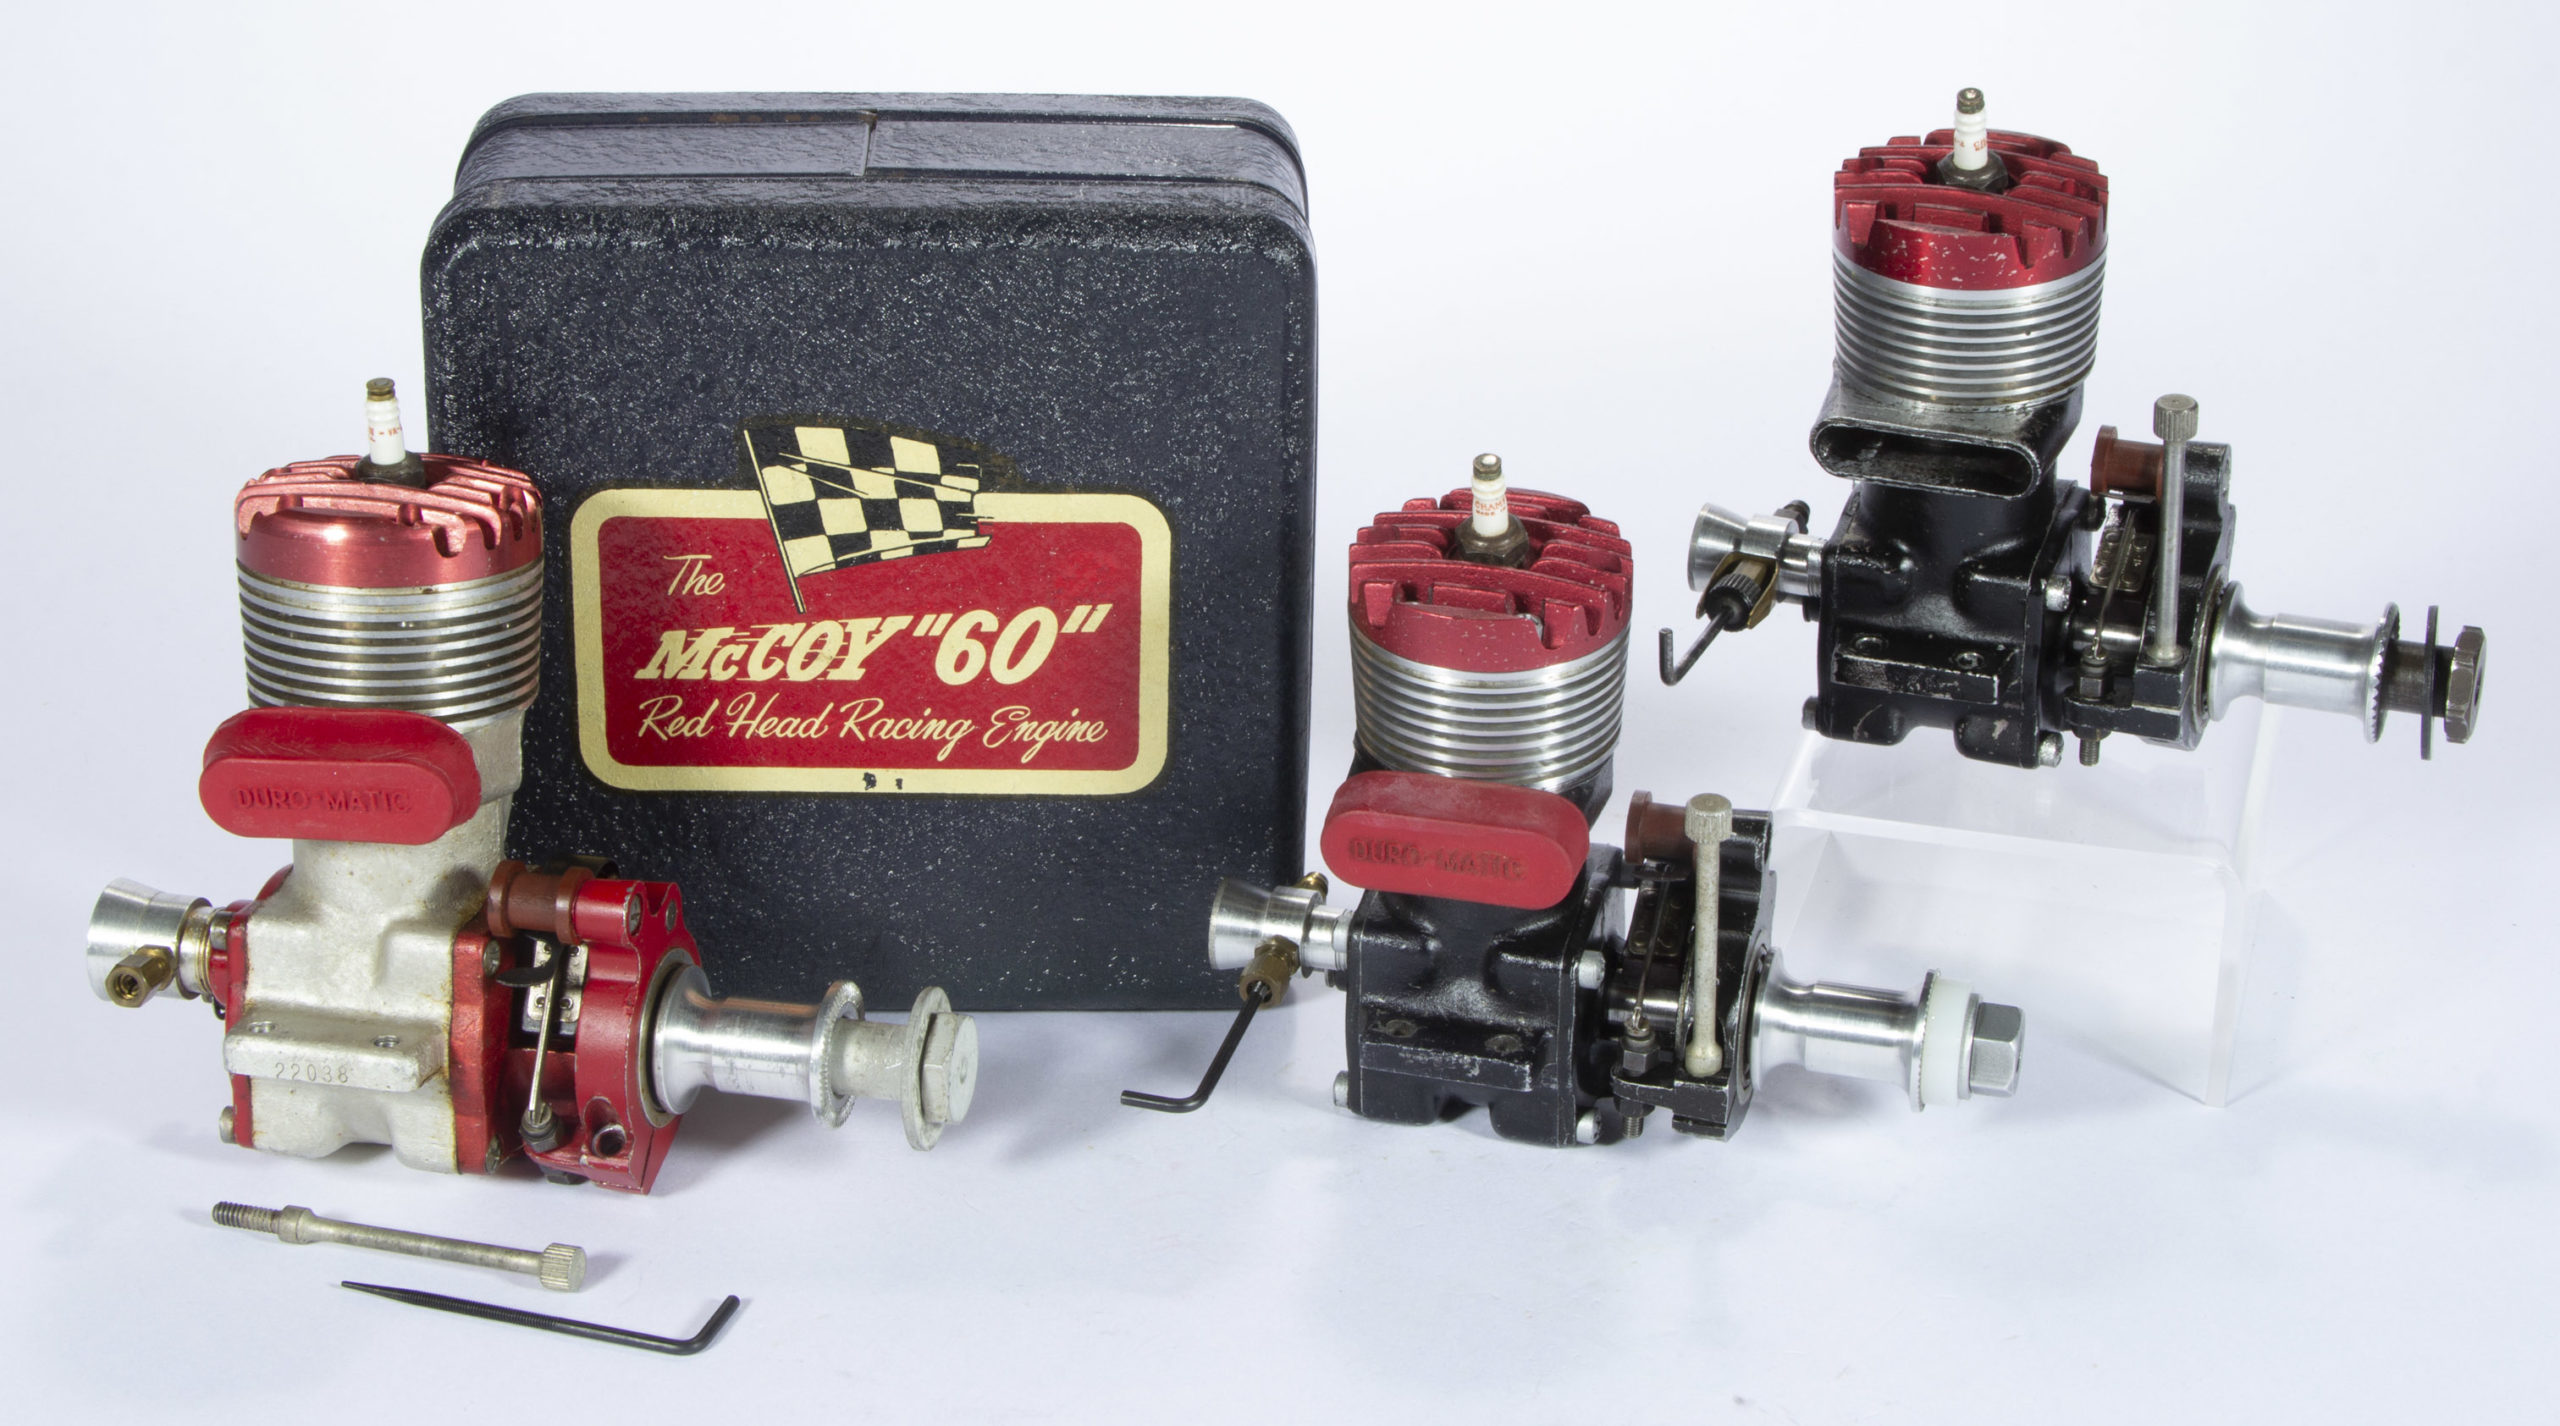 DURO-MATIC PRODUCTS MCCOY ASSORTED “RED HEAD” MODEL AIRPLANE ENGINES, LOT OF THREE,